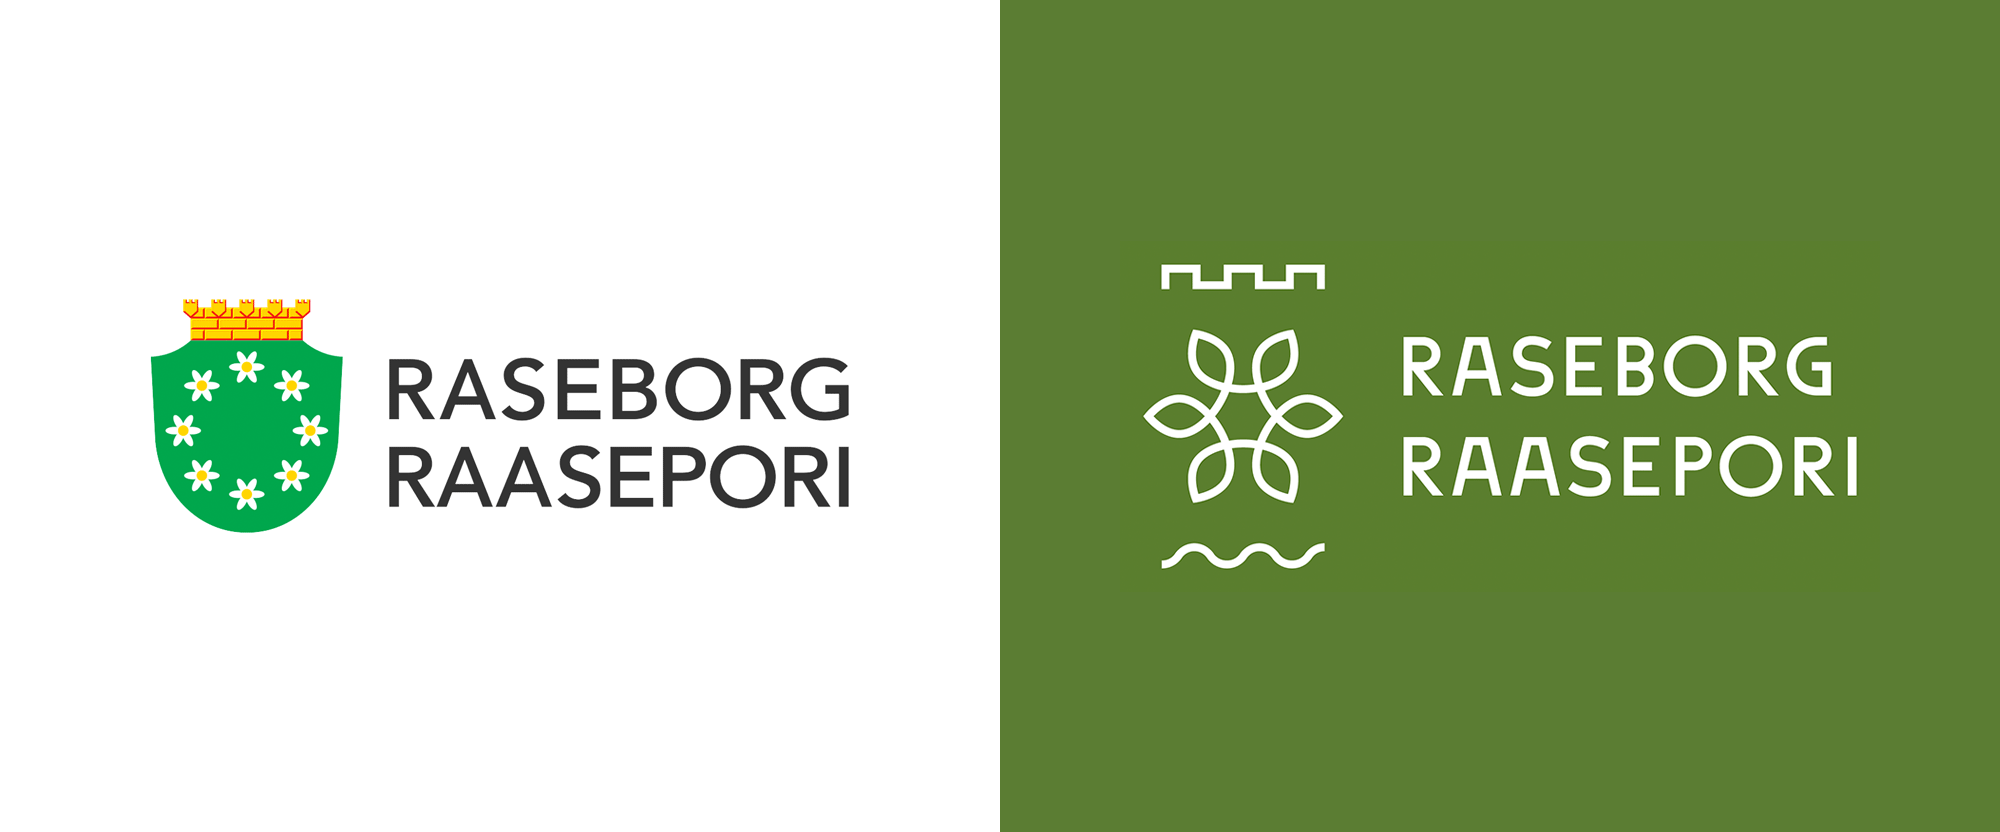 Marker Logo - Brand New: New Logo and Identity for Raseborg by Marker Creative